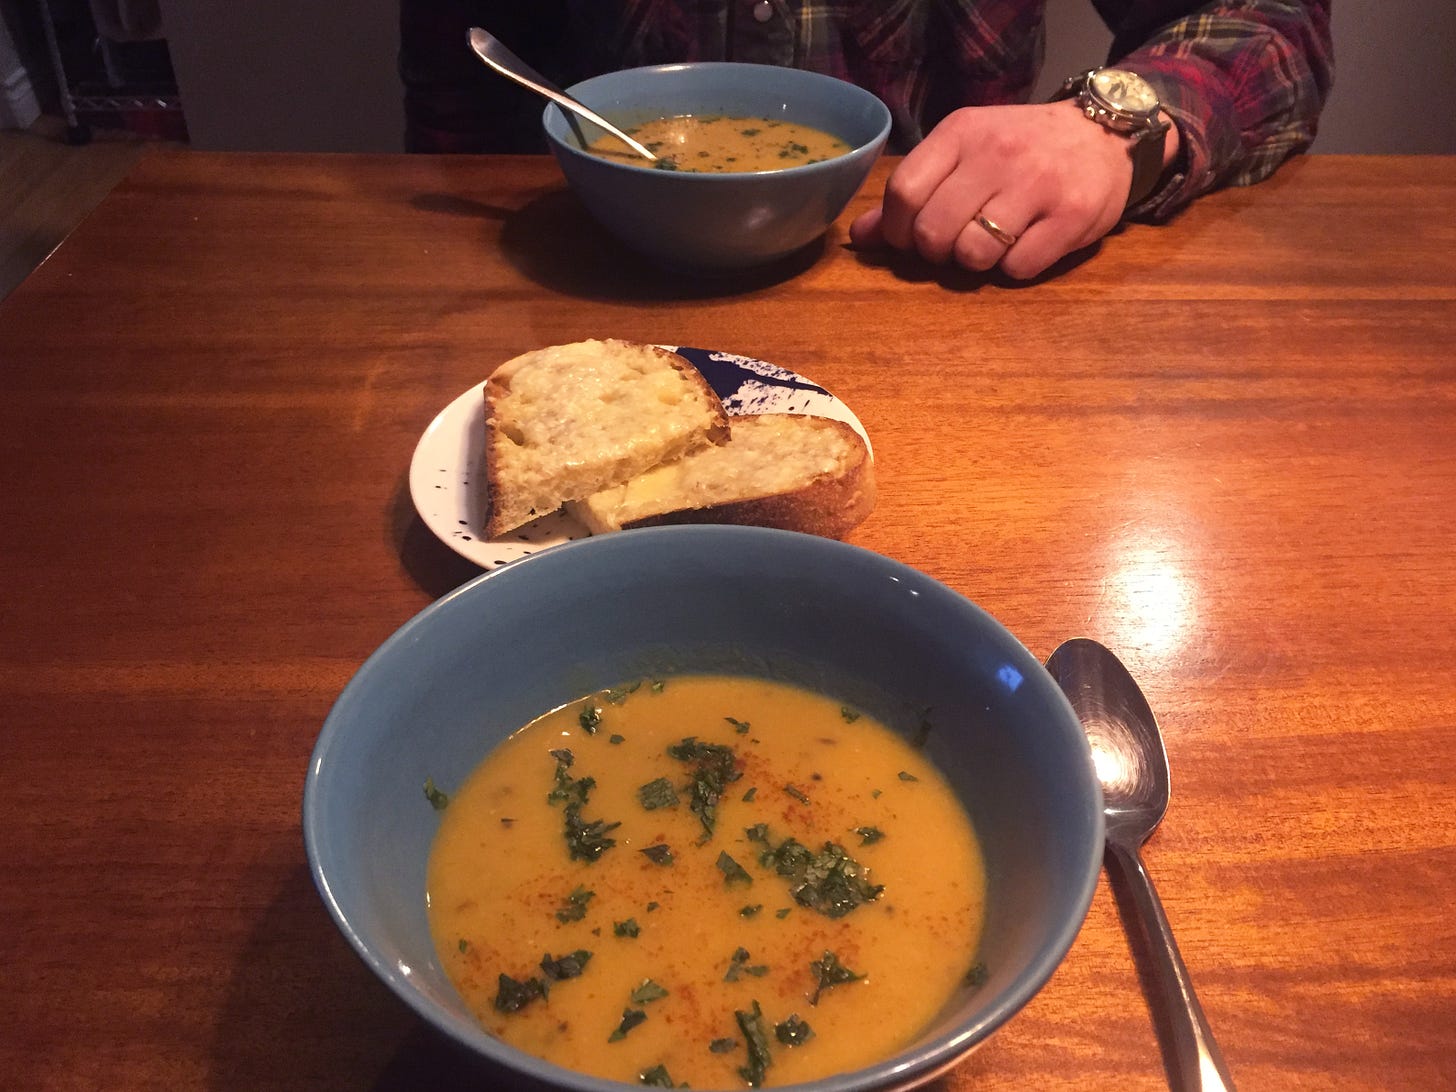 Two blue bowls across from each other on the table, each full of yellow lentil soup dusted with cilantro and chili powder. Between the two bowls is a plate with slices of cheesy toast.